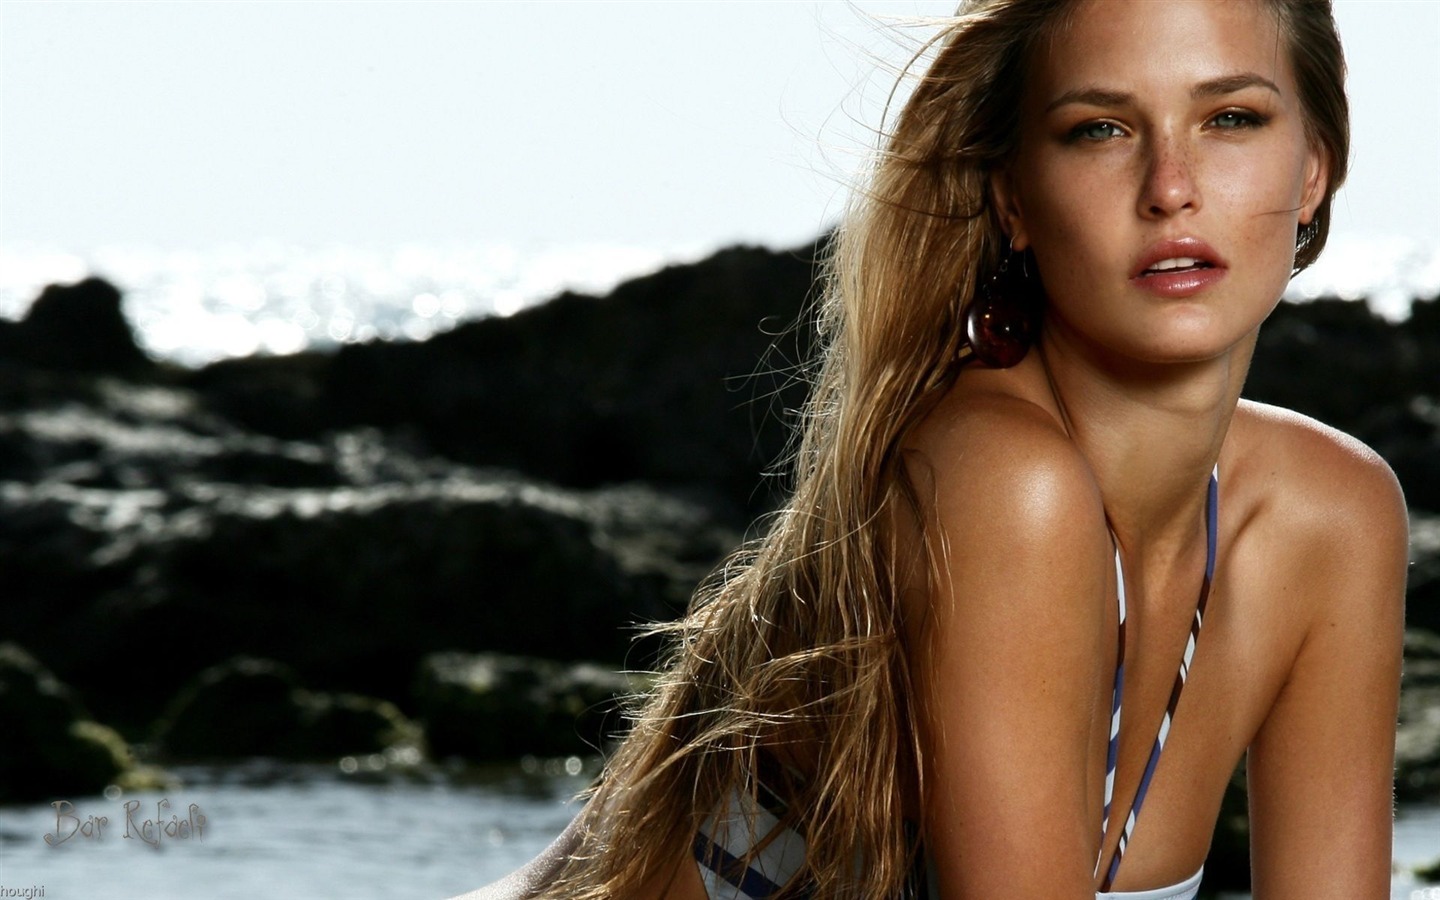 Bar Refaeli #009 - 1440x900 Wallpapers Pictures Photos Images